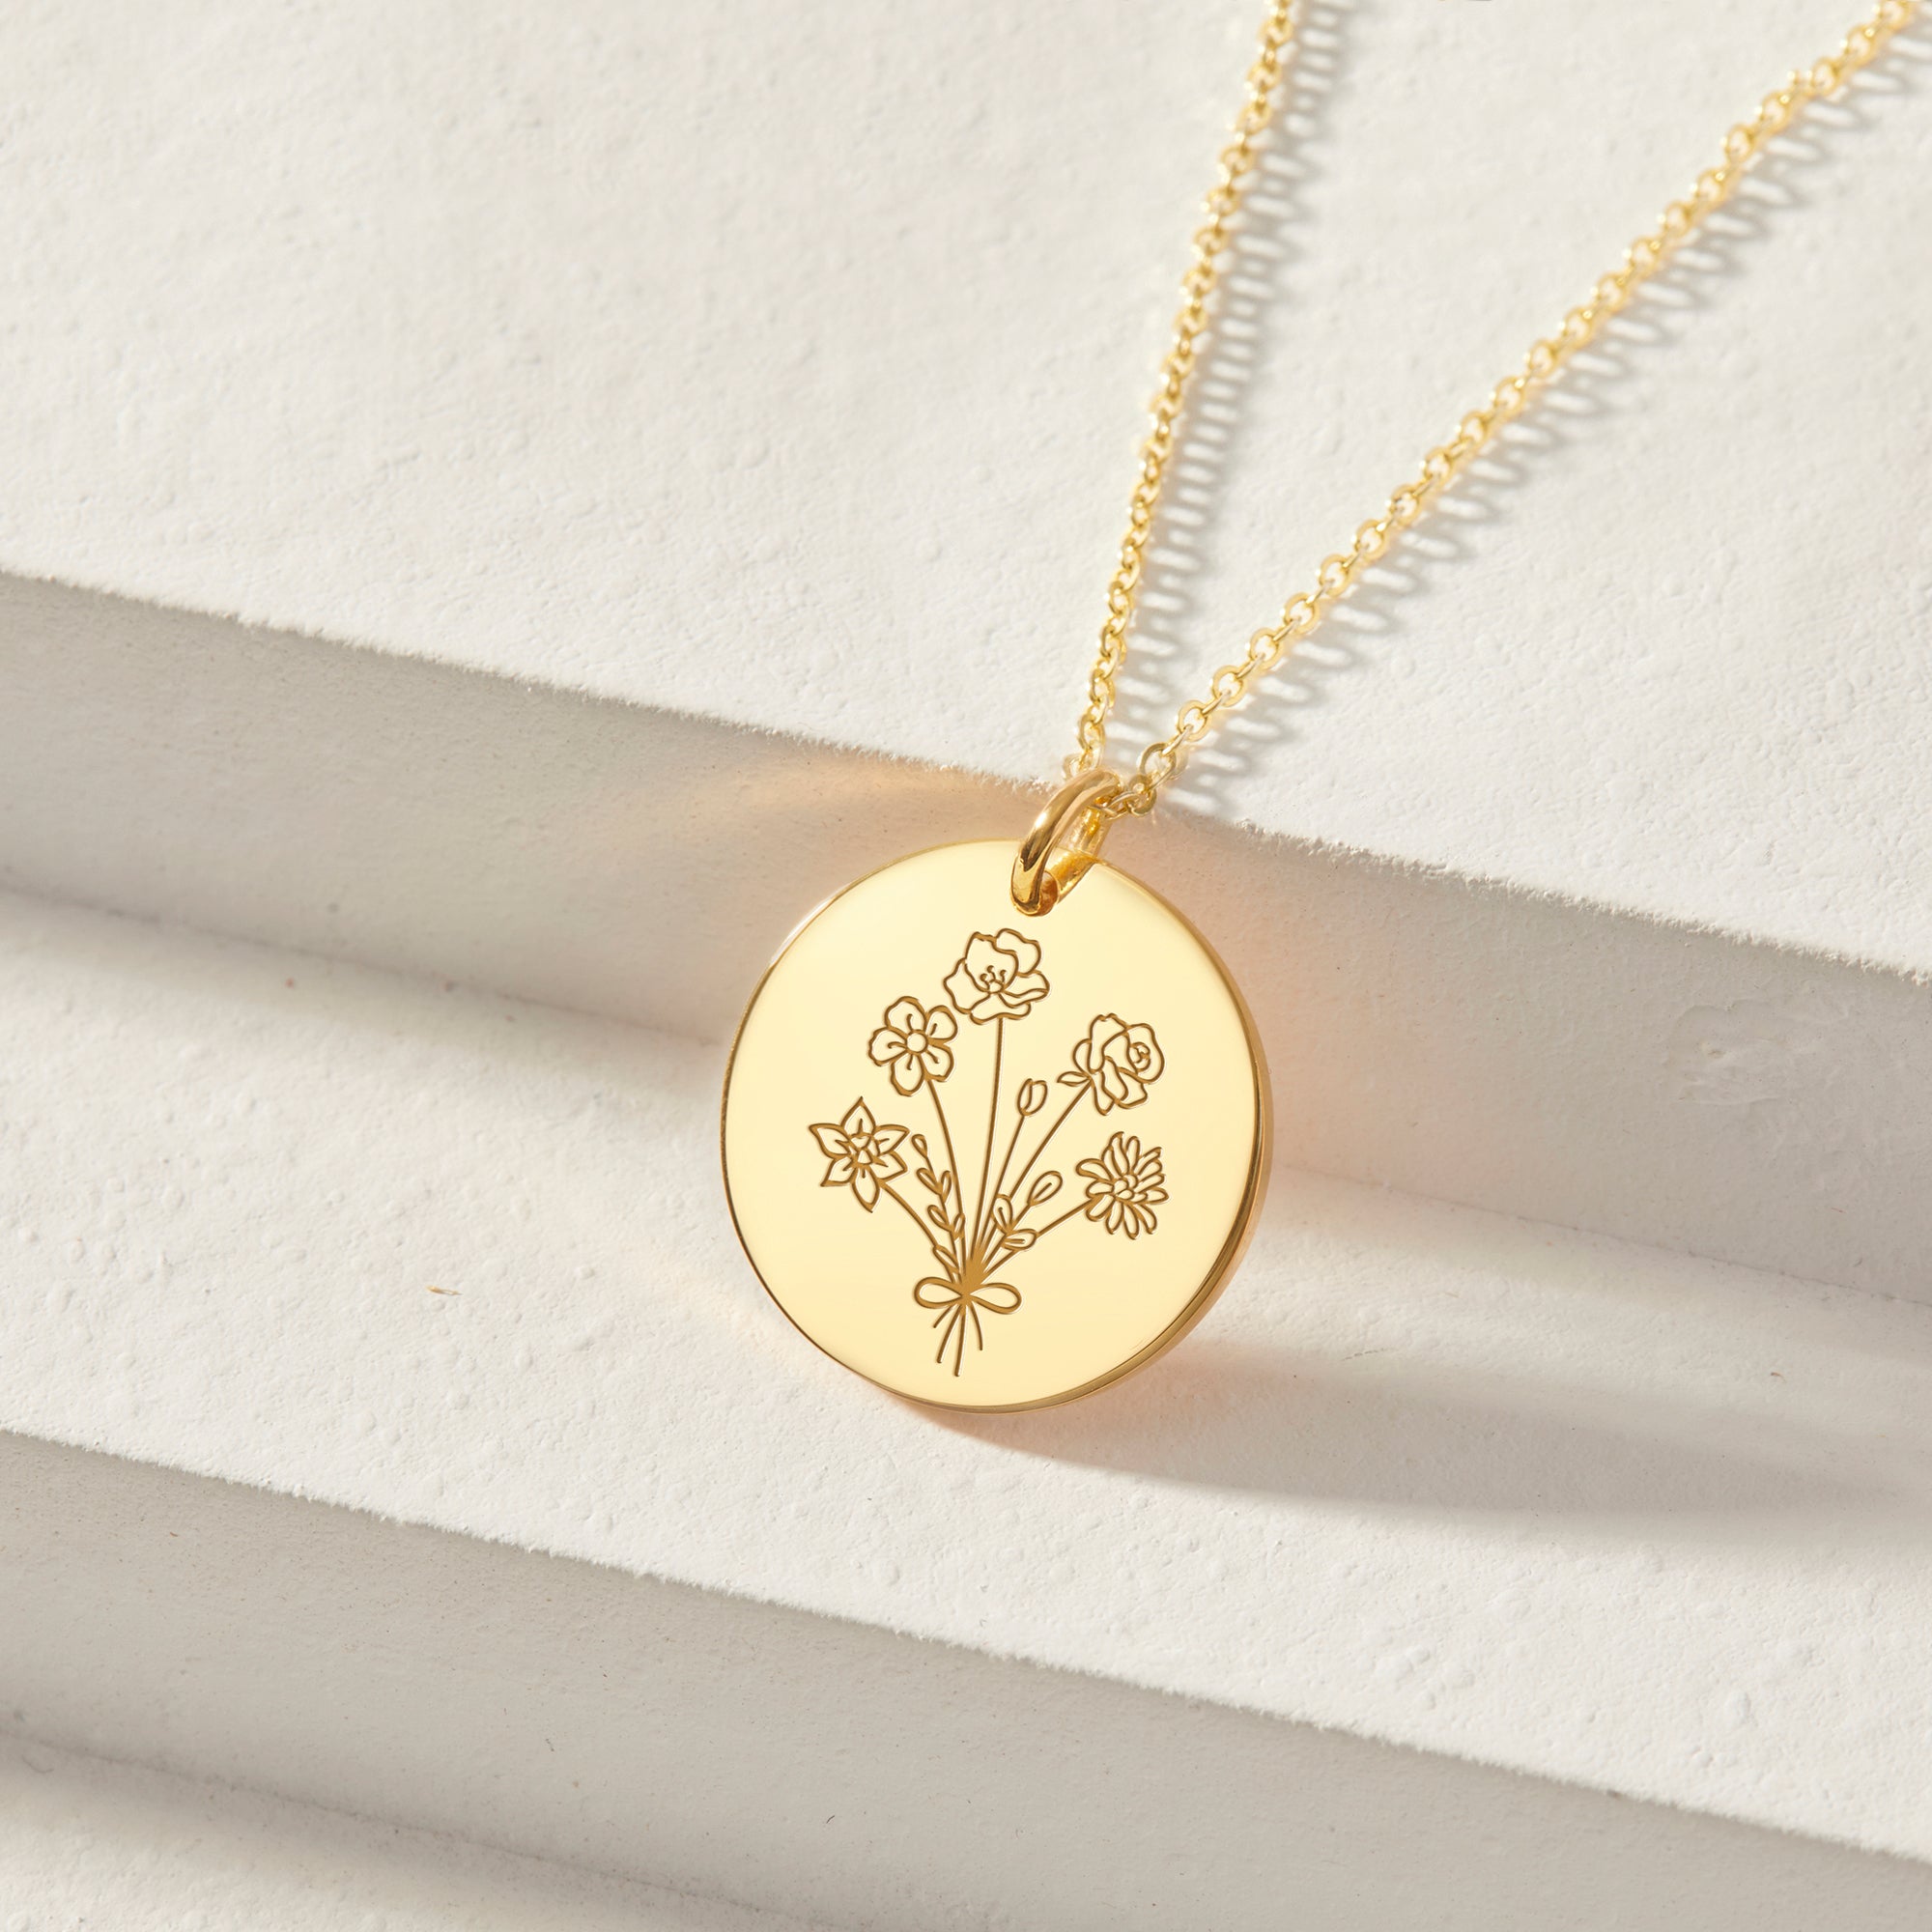 Personalized Birth Flower Necklace - Up to 5 Flowers, 925 Sterling Silver & 18K Gold Plated, Gift for Mom, Grandma, Daughter - Necklaces - Bijou Her -  -  - 